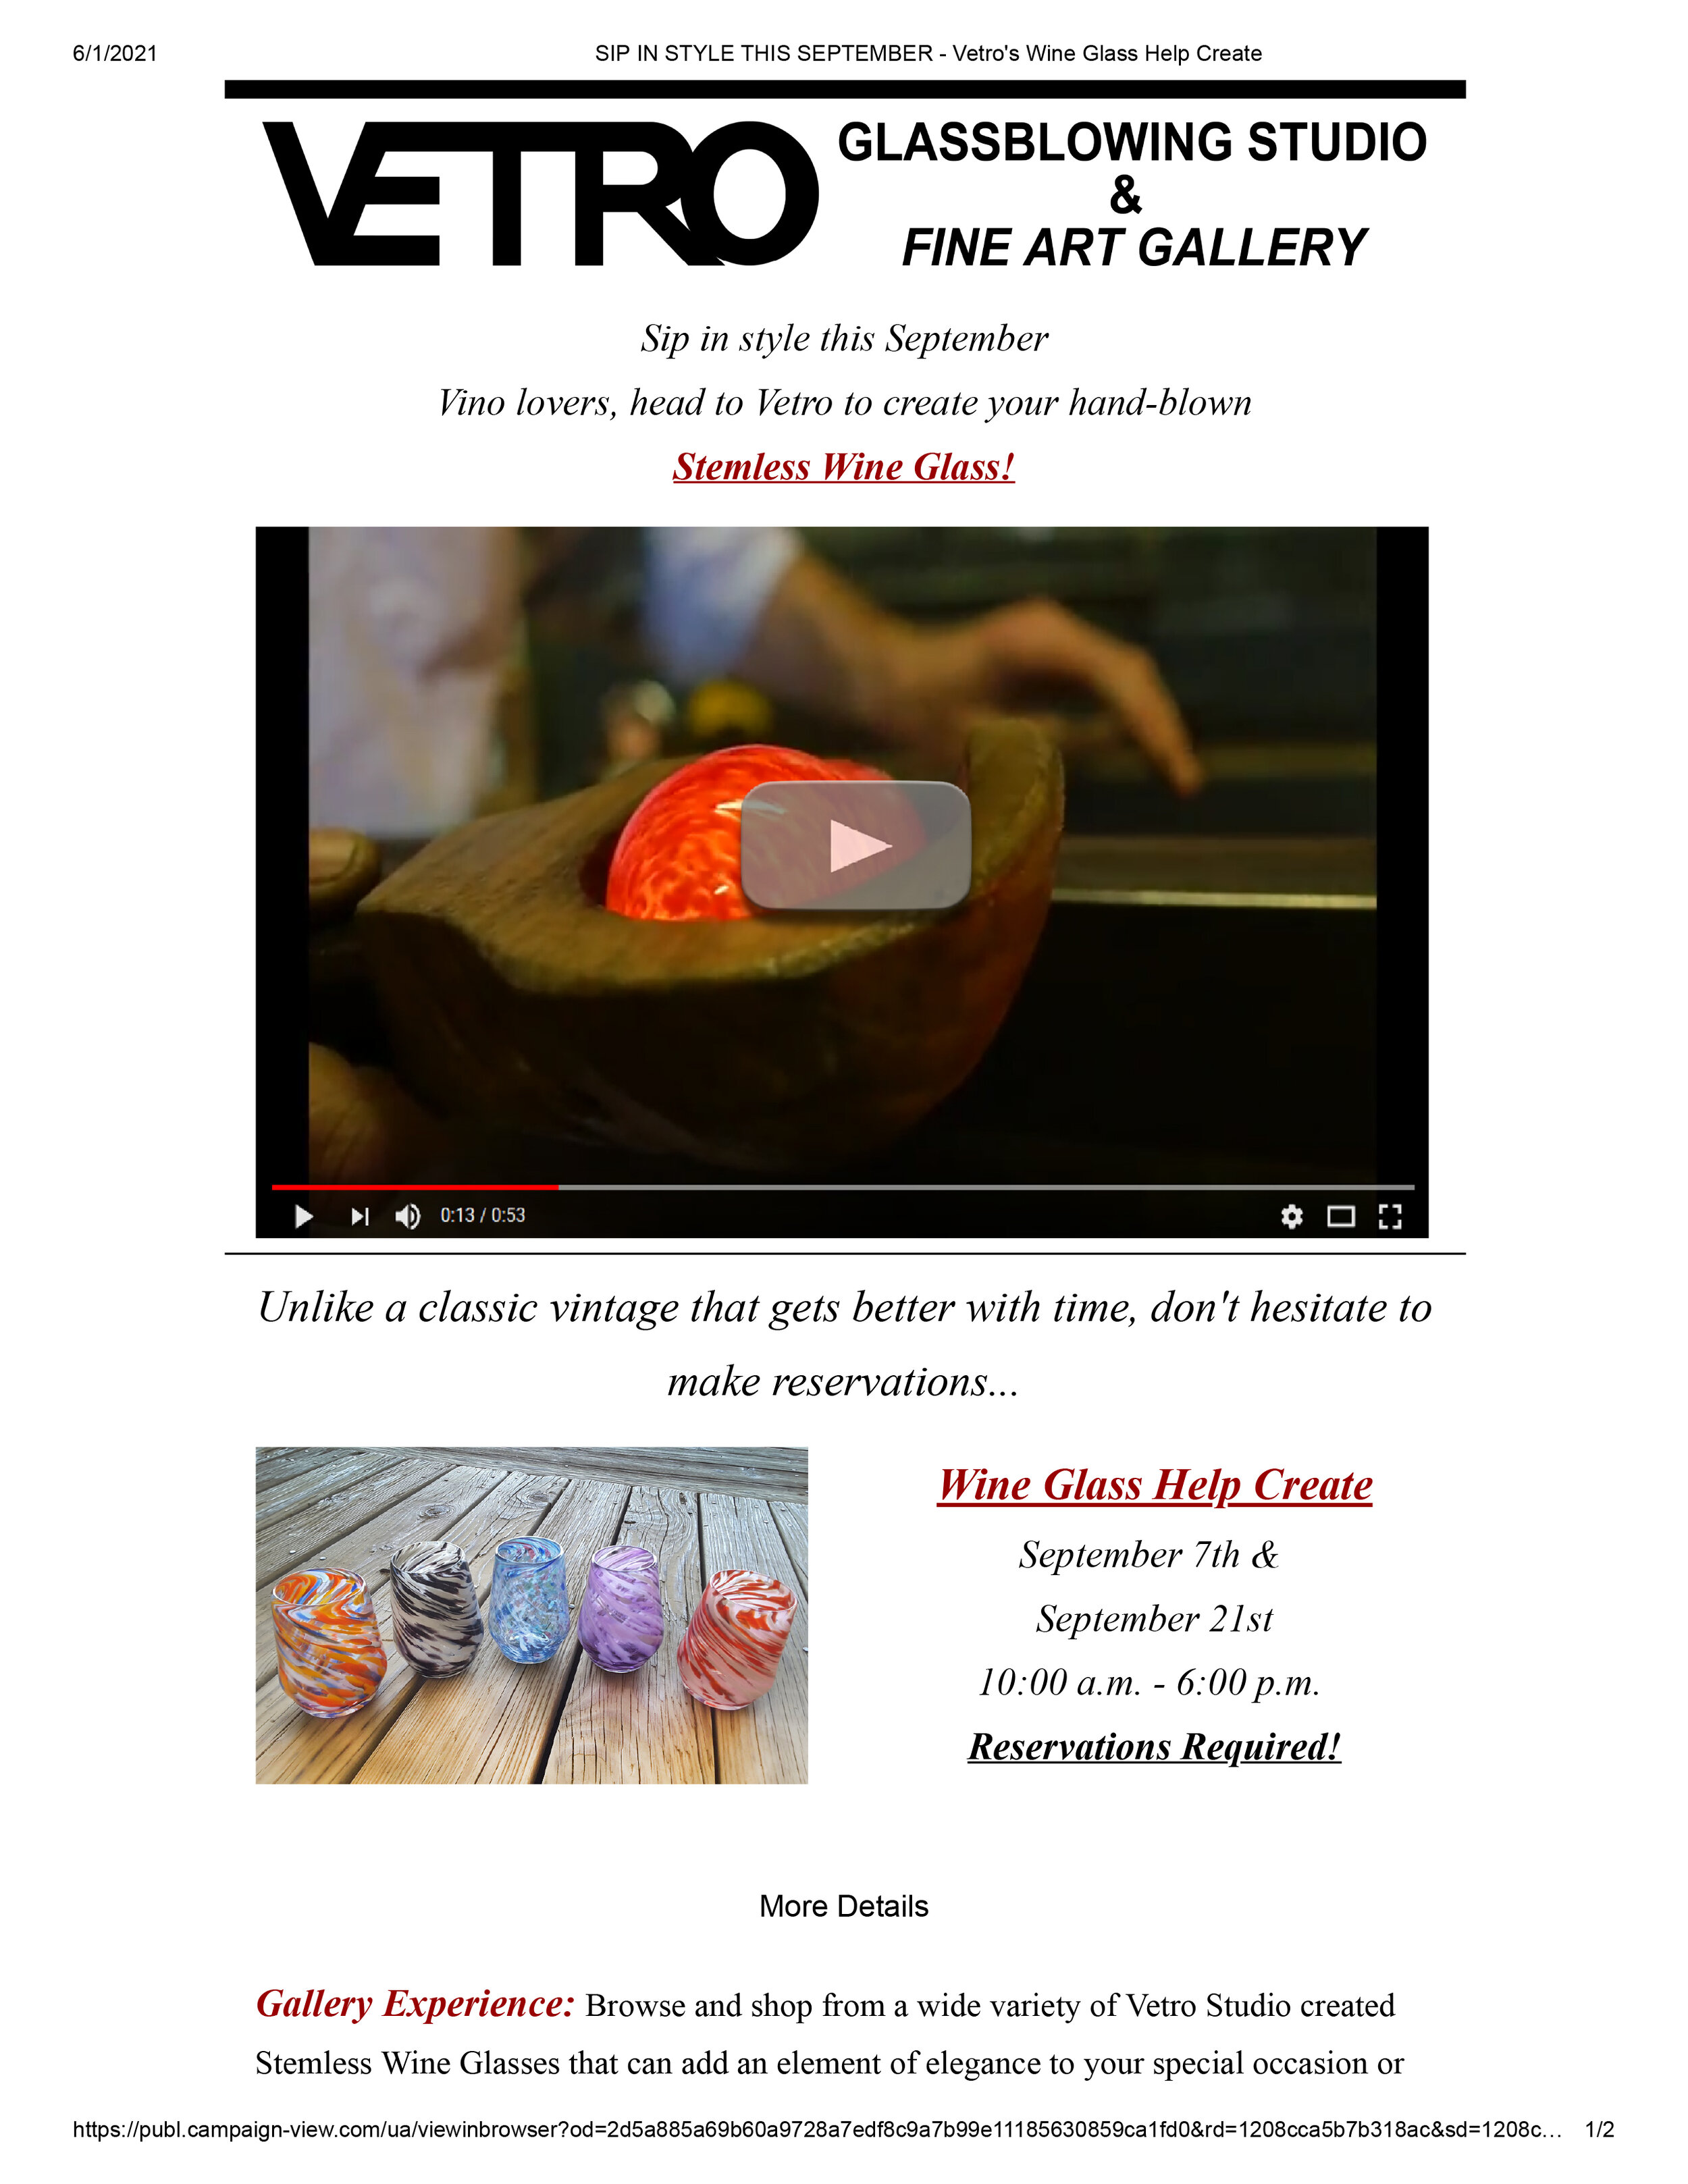 Email Campaigns -Vetro Glassblowing Studio - Sip in style this September-1.jpg